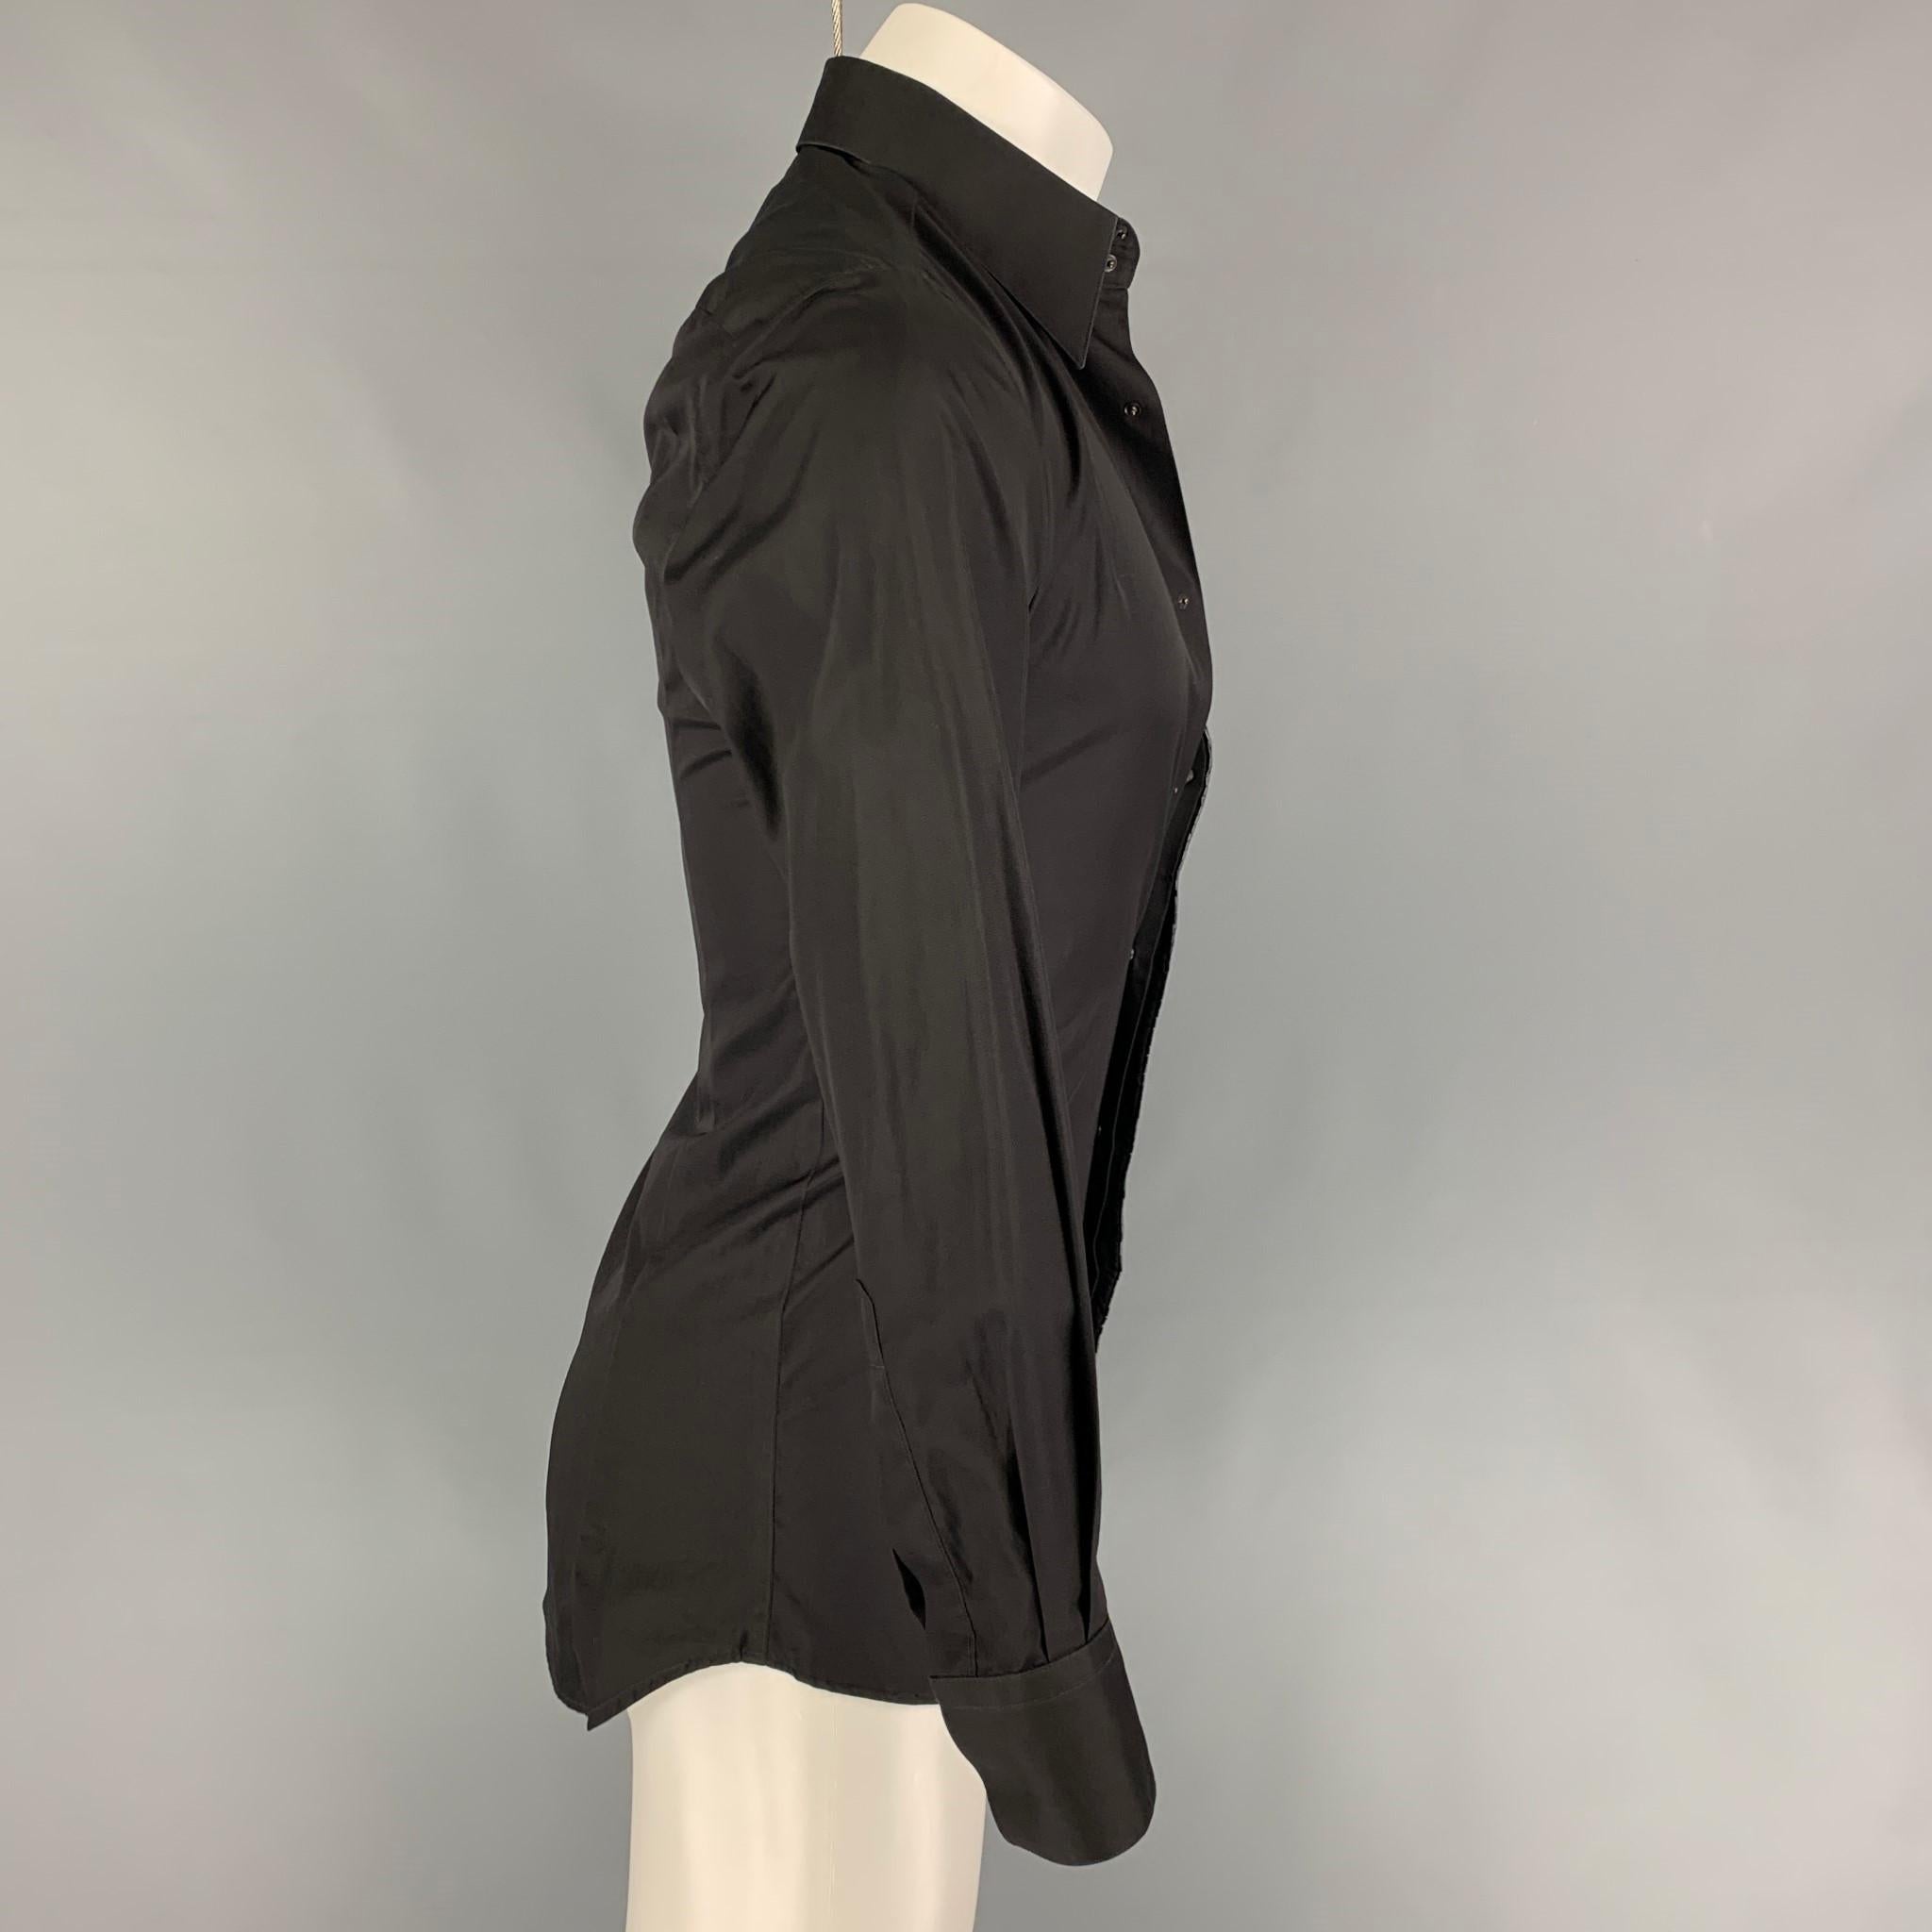 THIERRY MUGLER long sleeve shirt comes in a black cotton featuring a beaded trim, spread collar, and a hidden placket closure. Made in France. Shirt styled with a half button look but can be buttoned all the way.

Very Good Pre-Owned